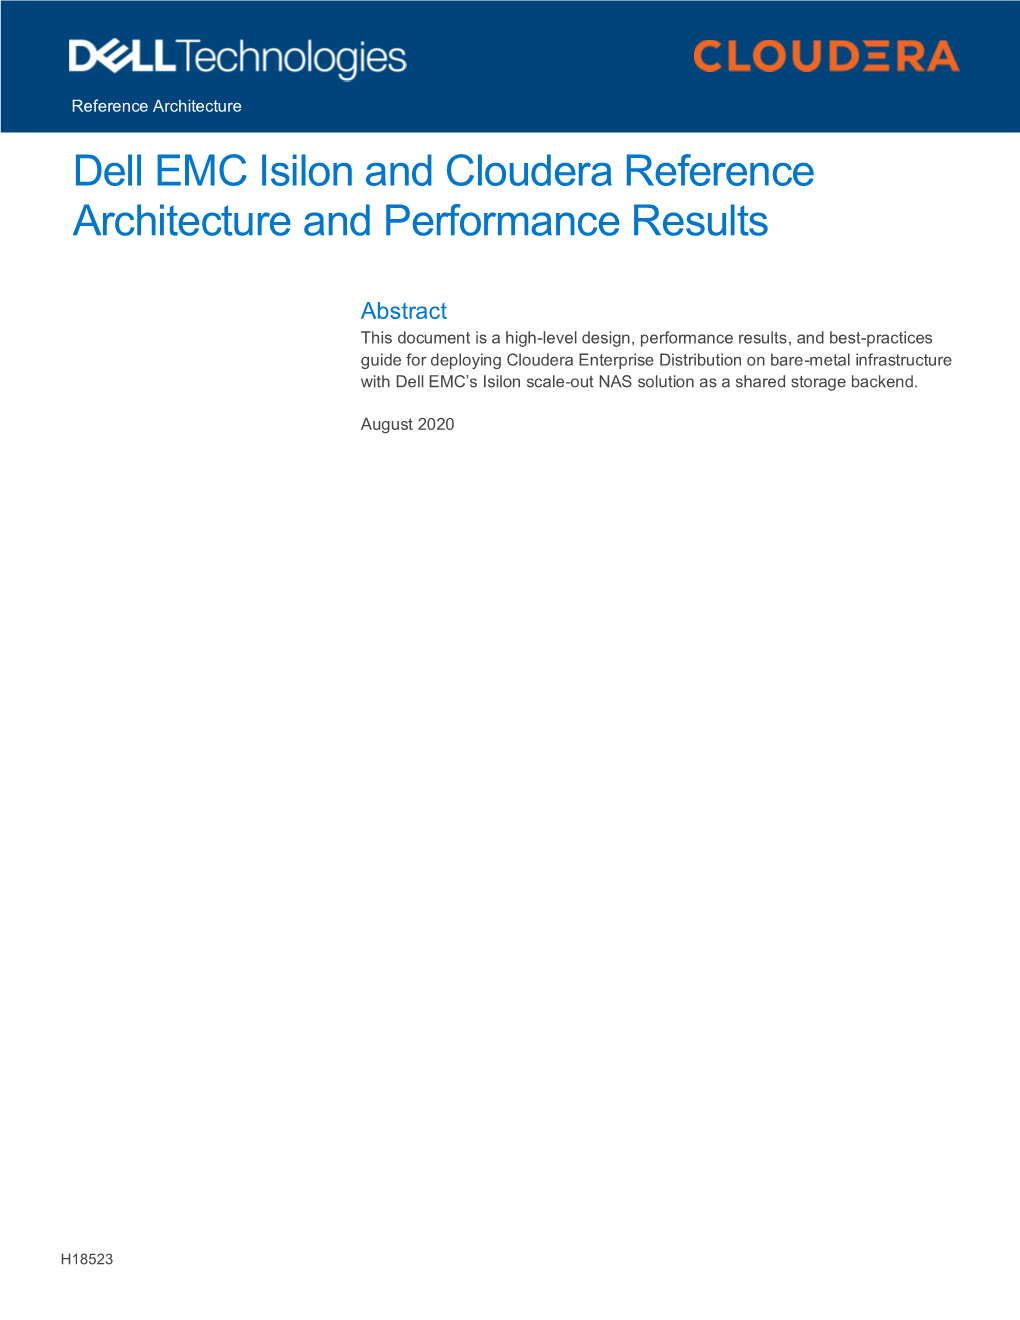 Dell EMC Isilon and Cloudera Reference Architecture and Performance Results